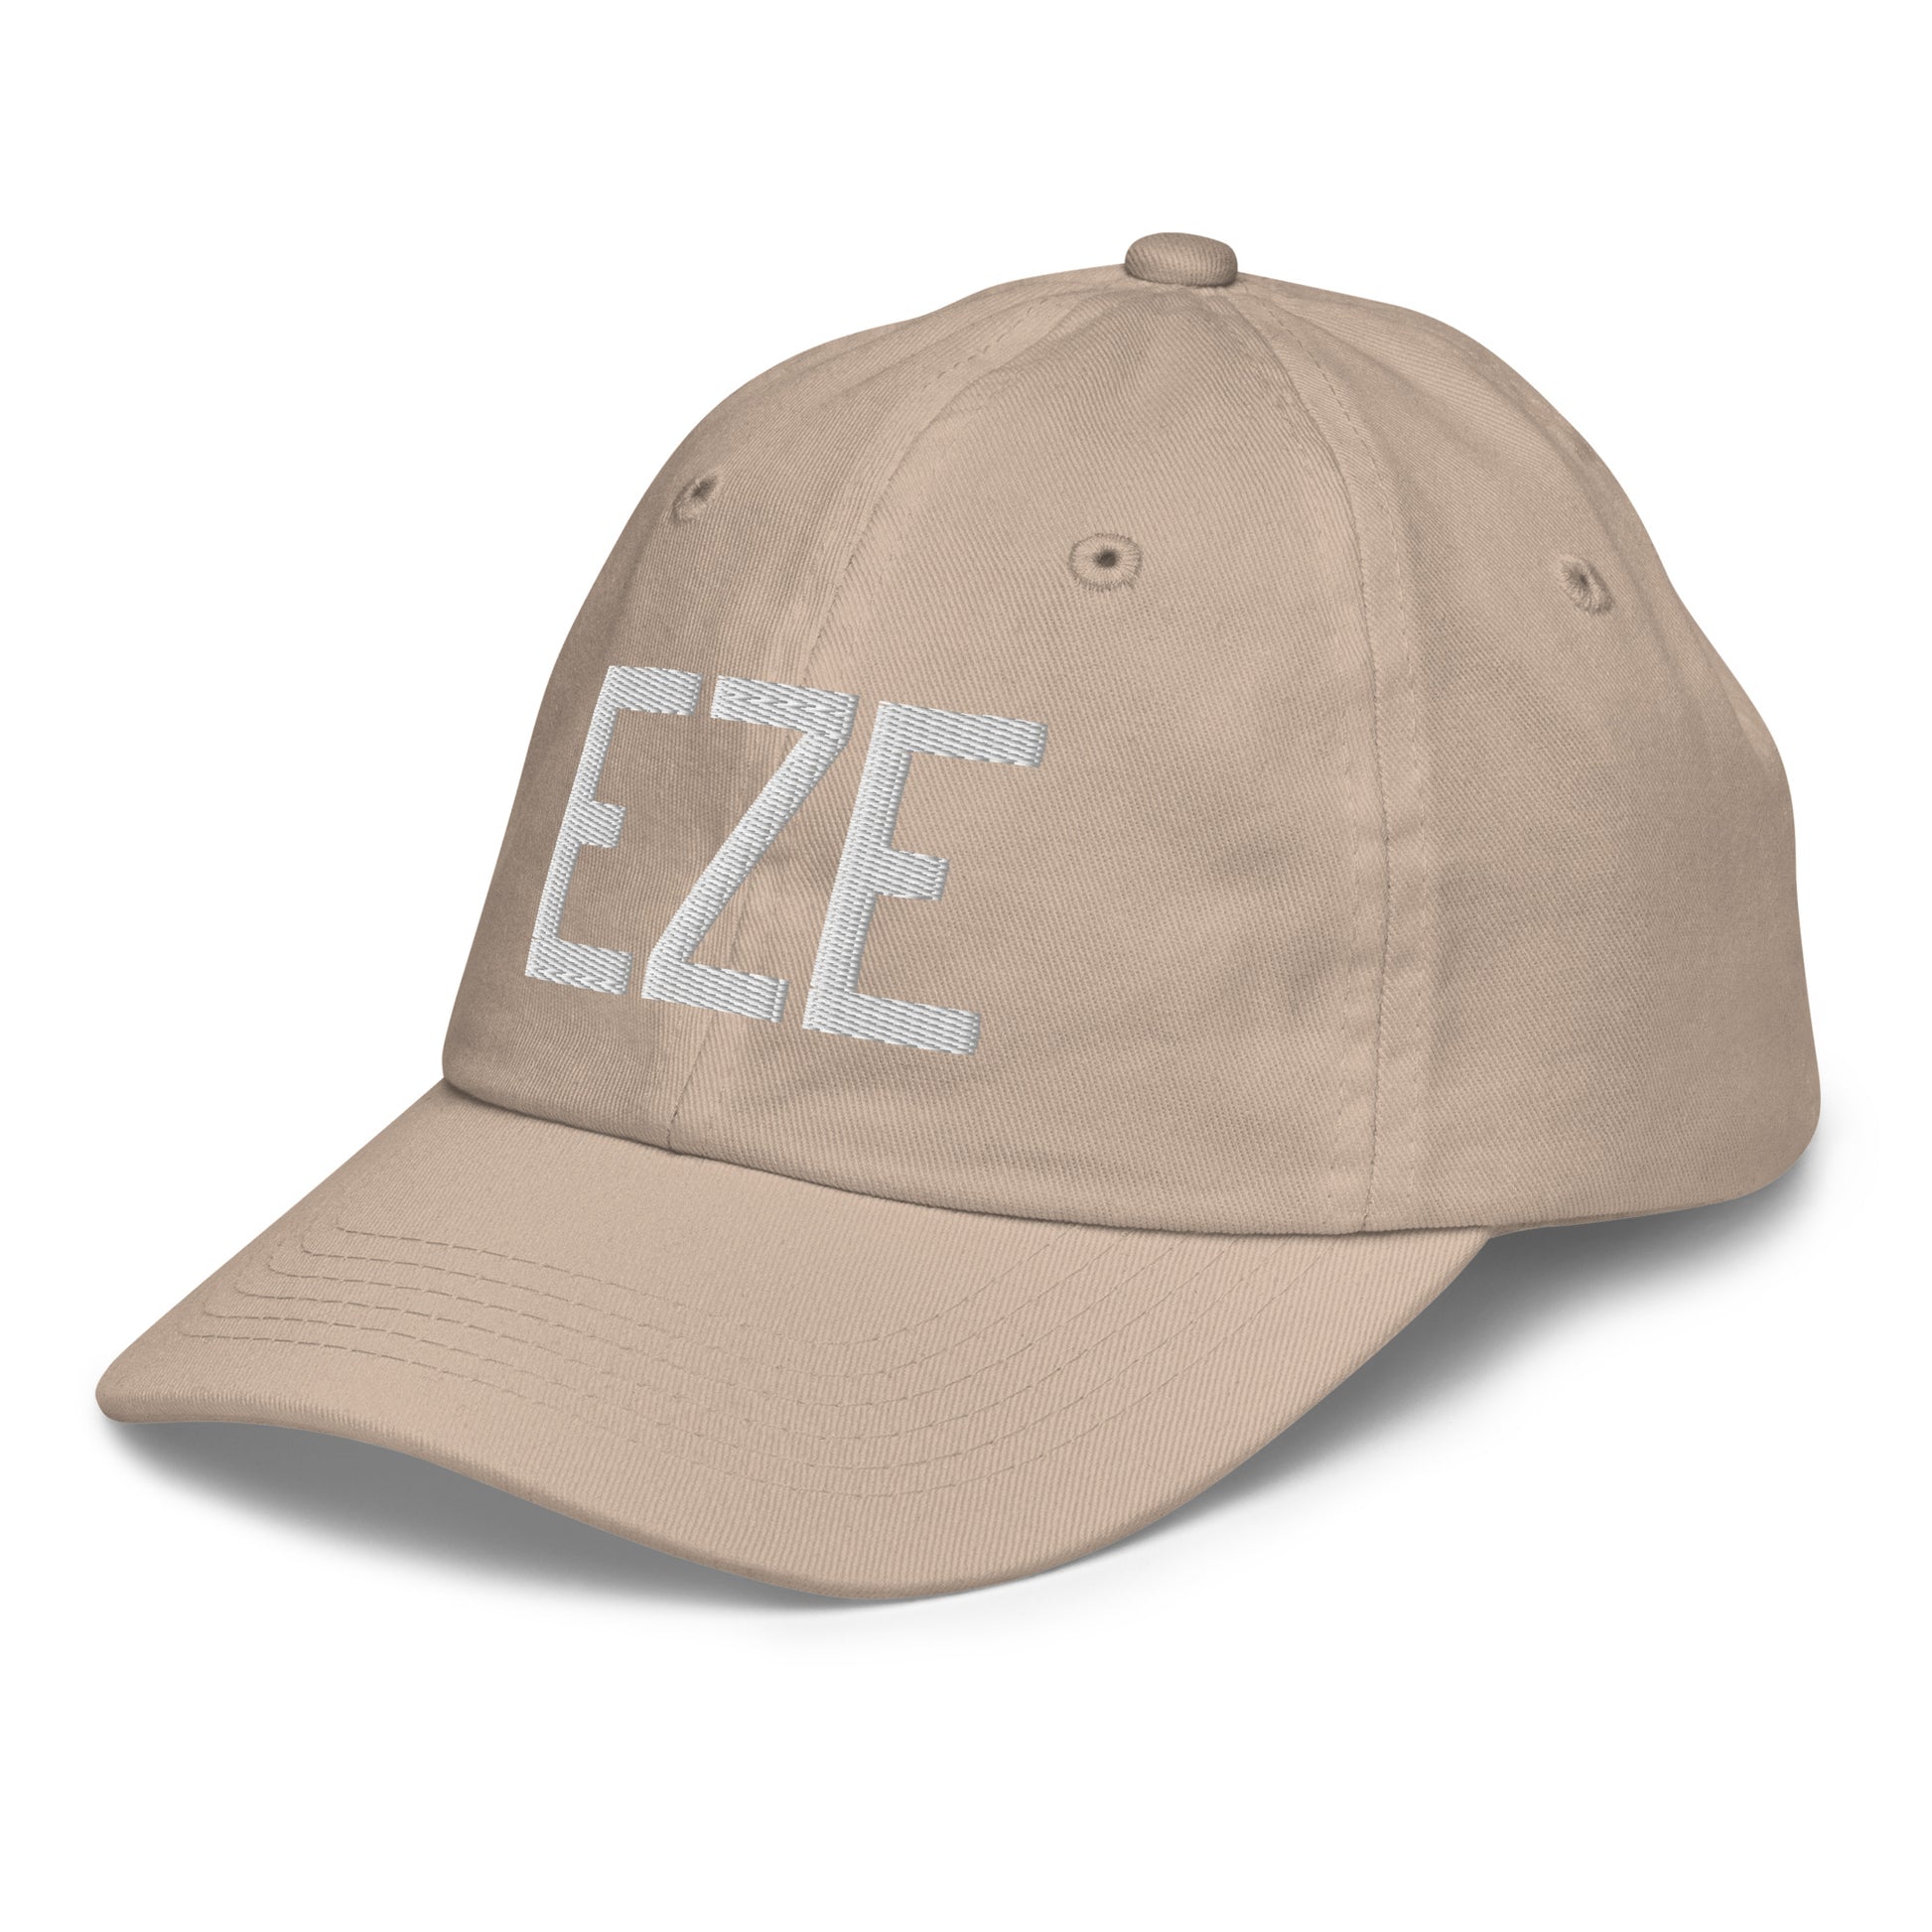 Airport Code Kid's Baseball Cap - White • EZE Buenos Aires • YHM Designs - Image 30